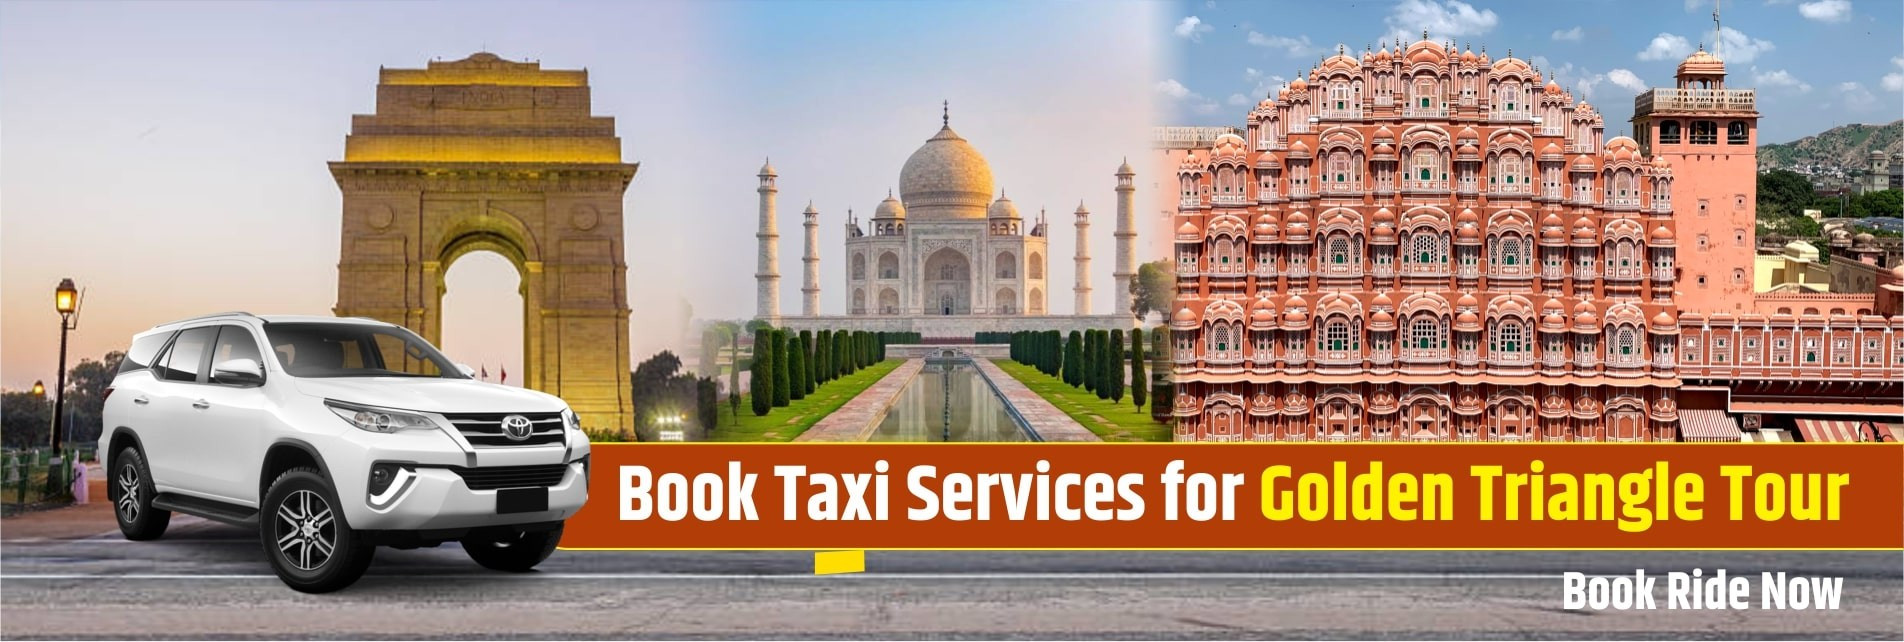 Looking for a best taxi service in Jaipur? Jaipurcitycab.in offers a complete tour experience with the best rates, the most courteous drivers, and the most comfortable cars. Check our website for more info.<br/> <br/> <a href=